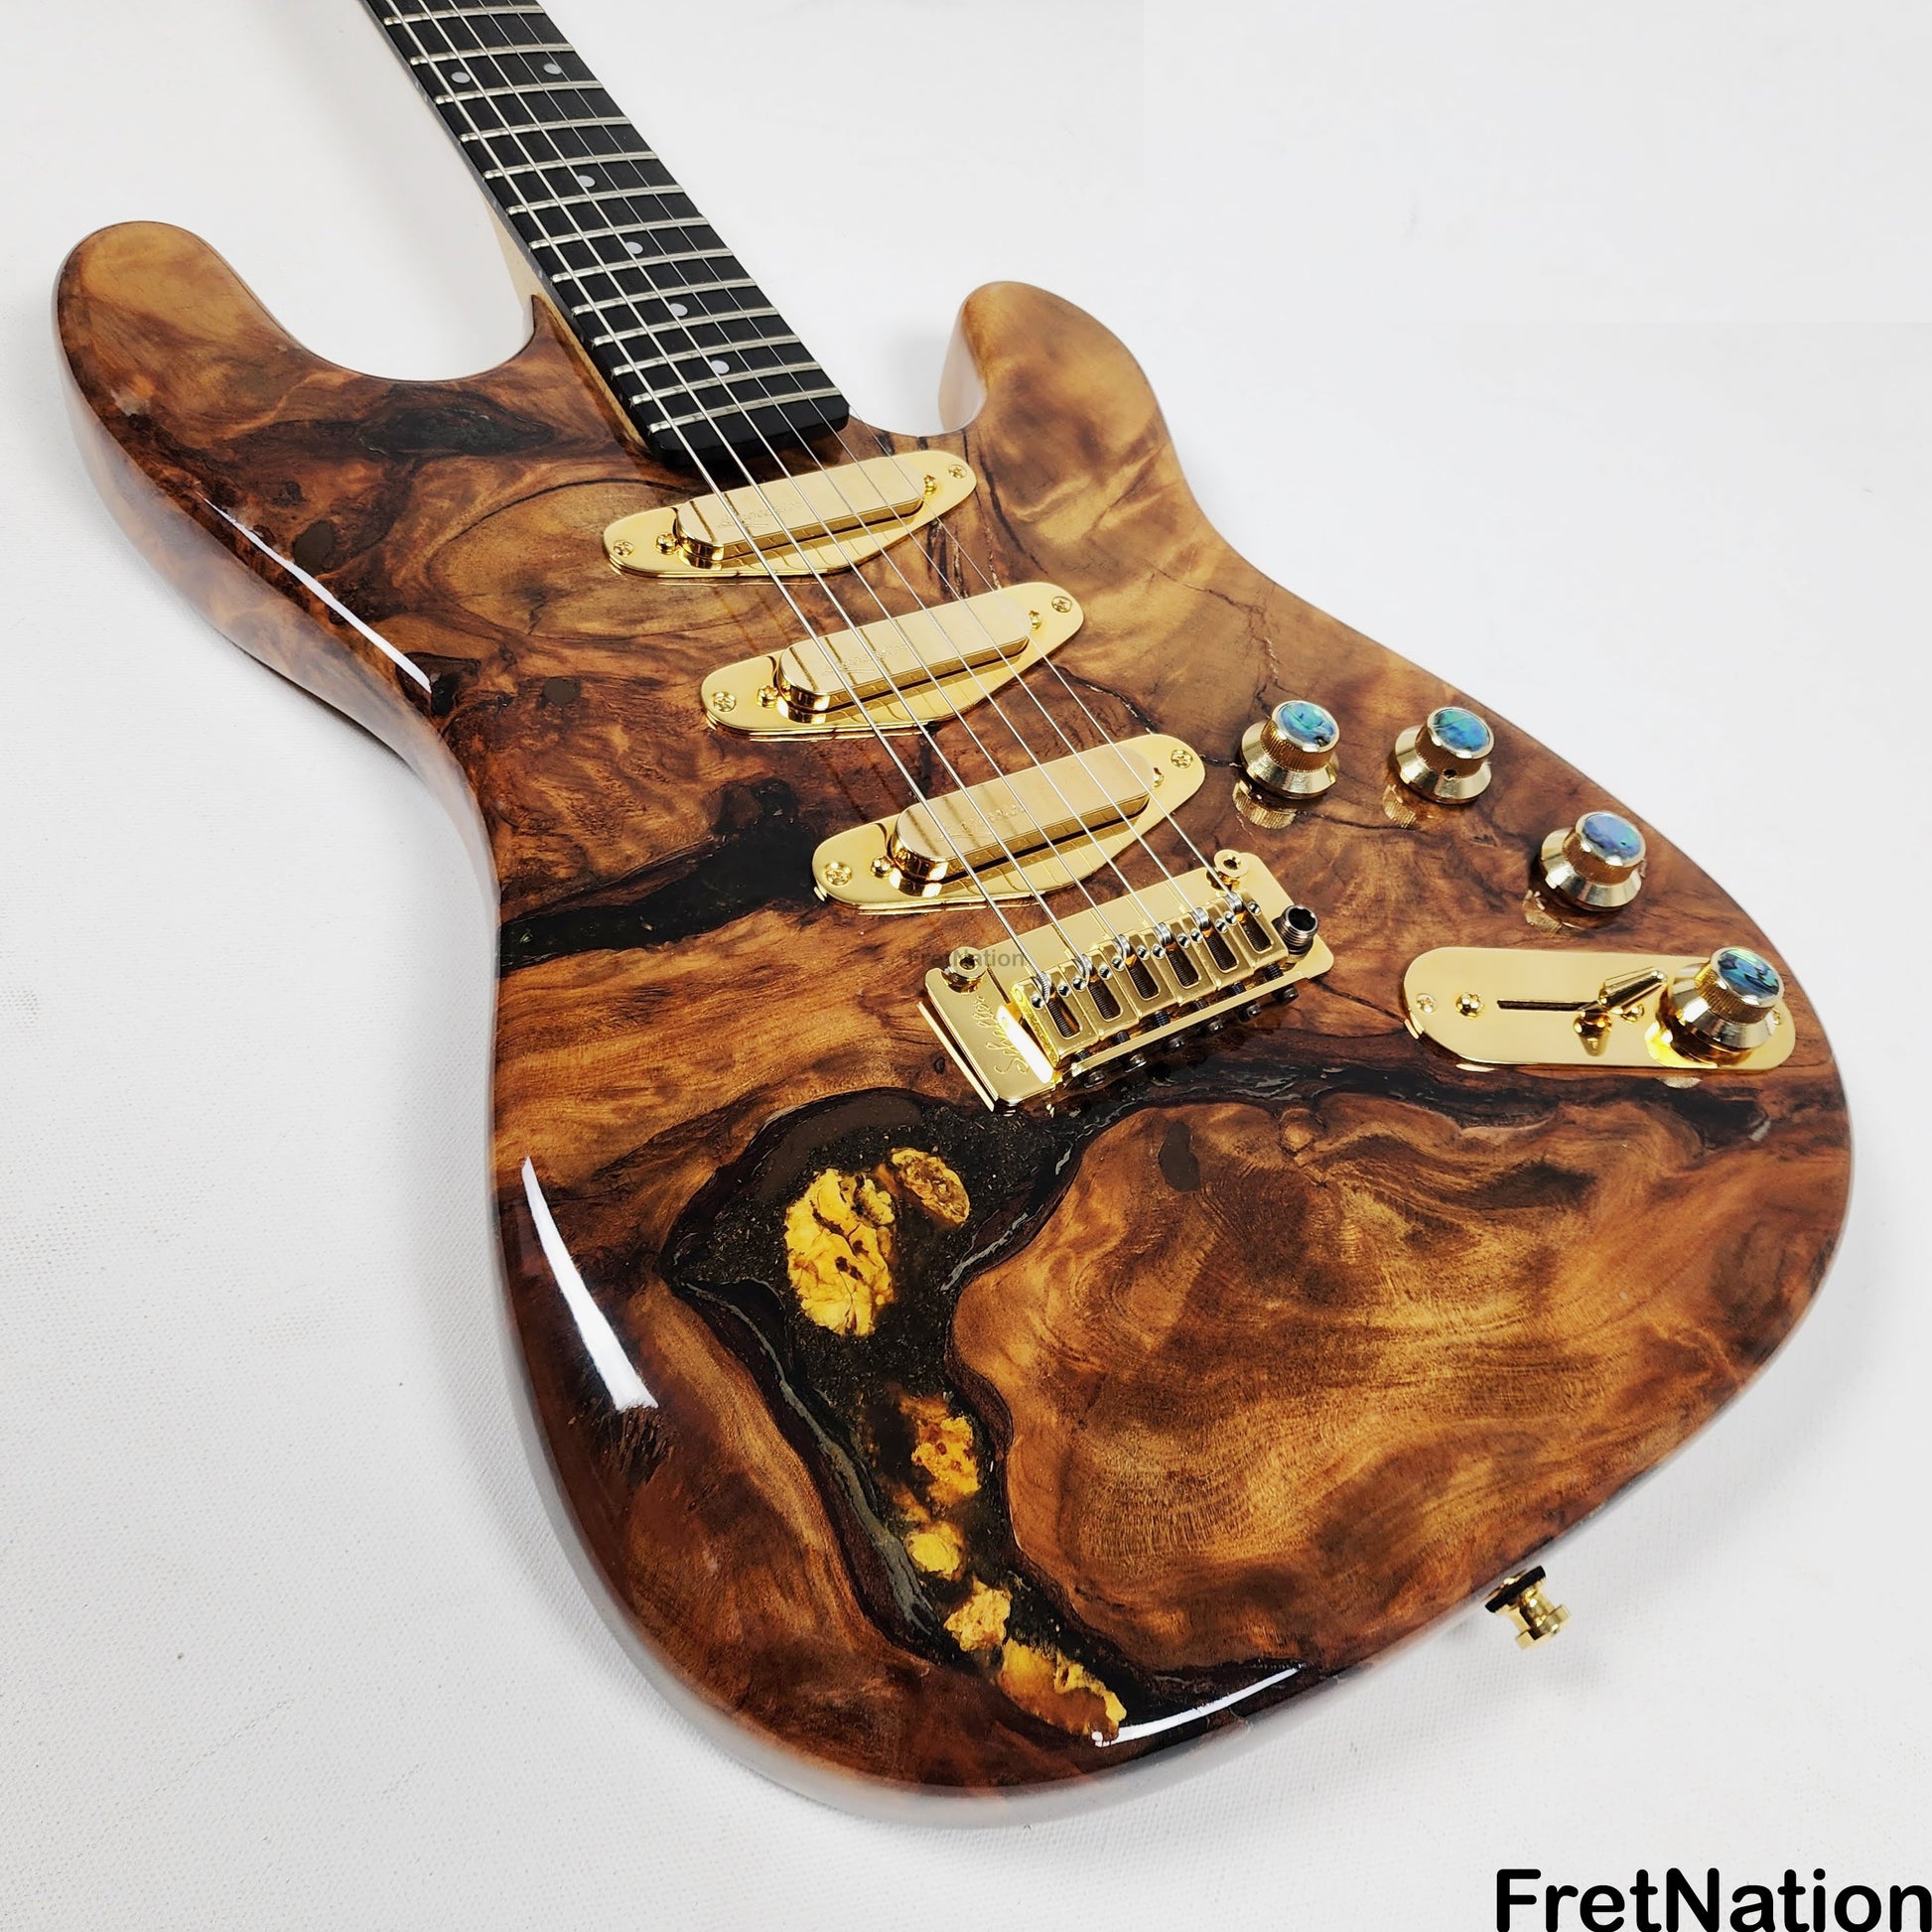 Fret Nation Langcaster New Zealand Swamp Kauri Electric Guitar - 10lbs #L12-S